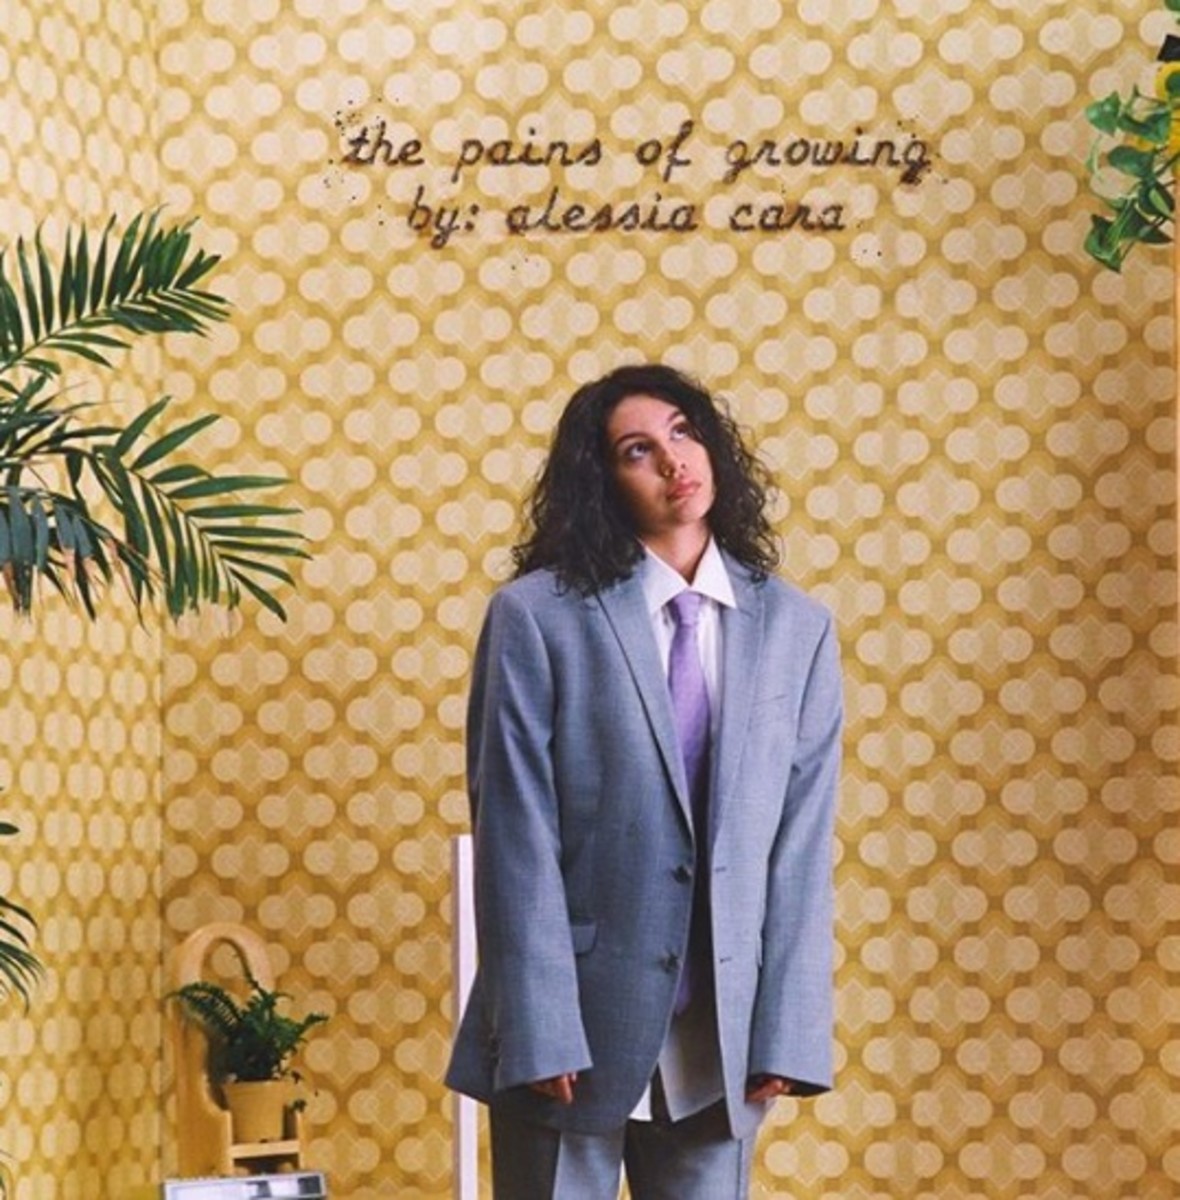 Alessia Cara - "The Pains of Growing" Album